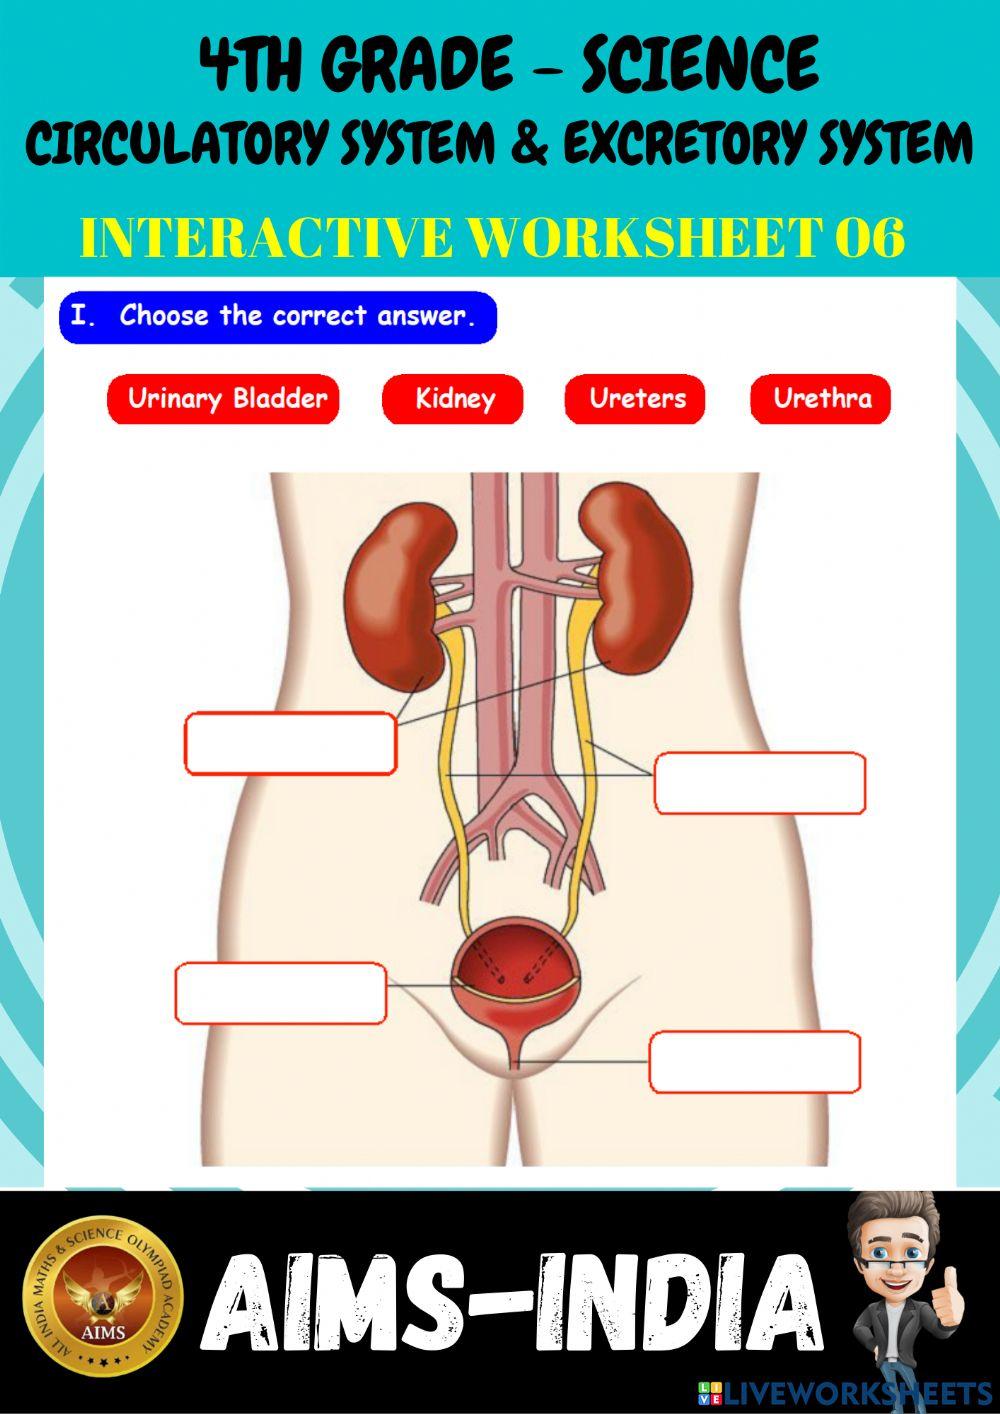 4th-science-ps06-circulatory system & excretory system